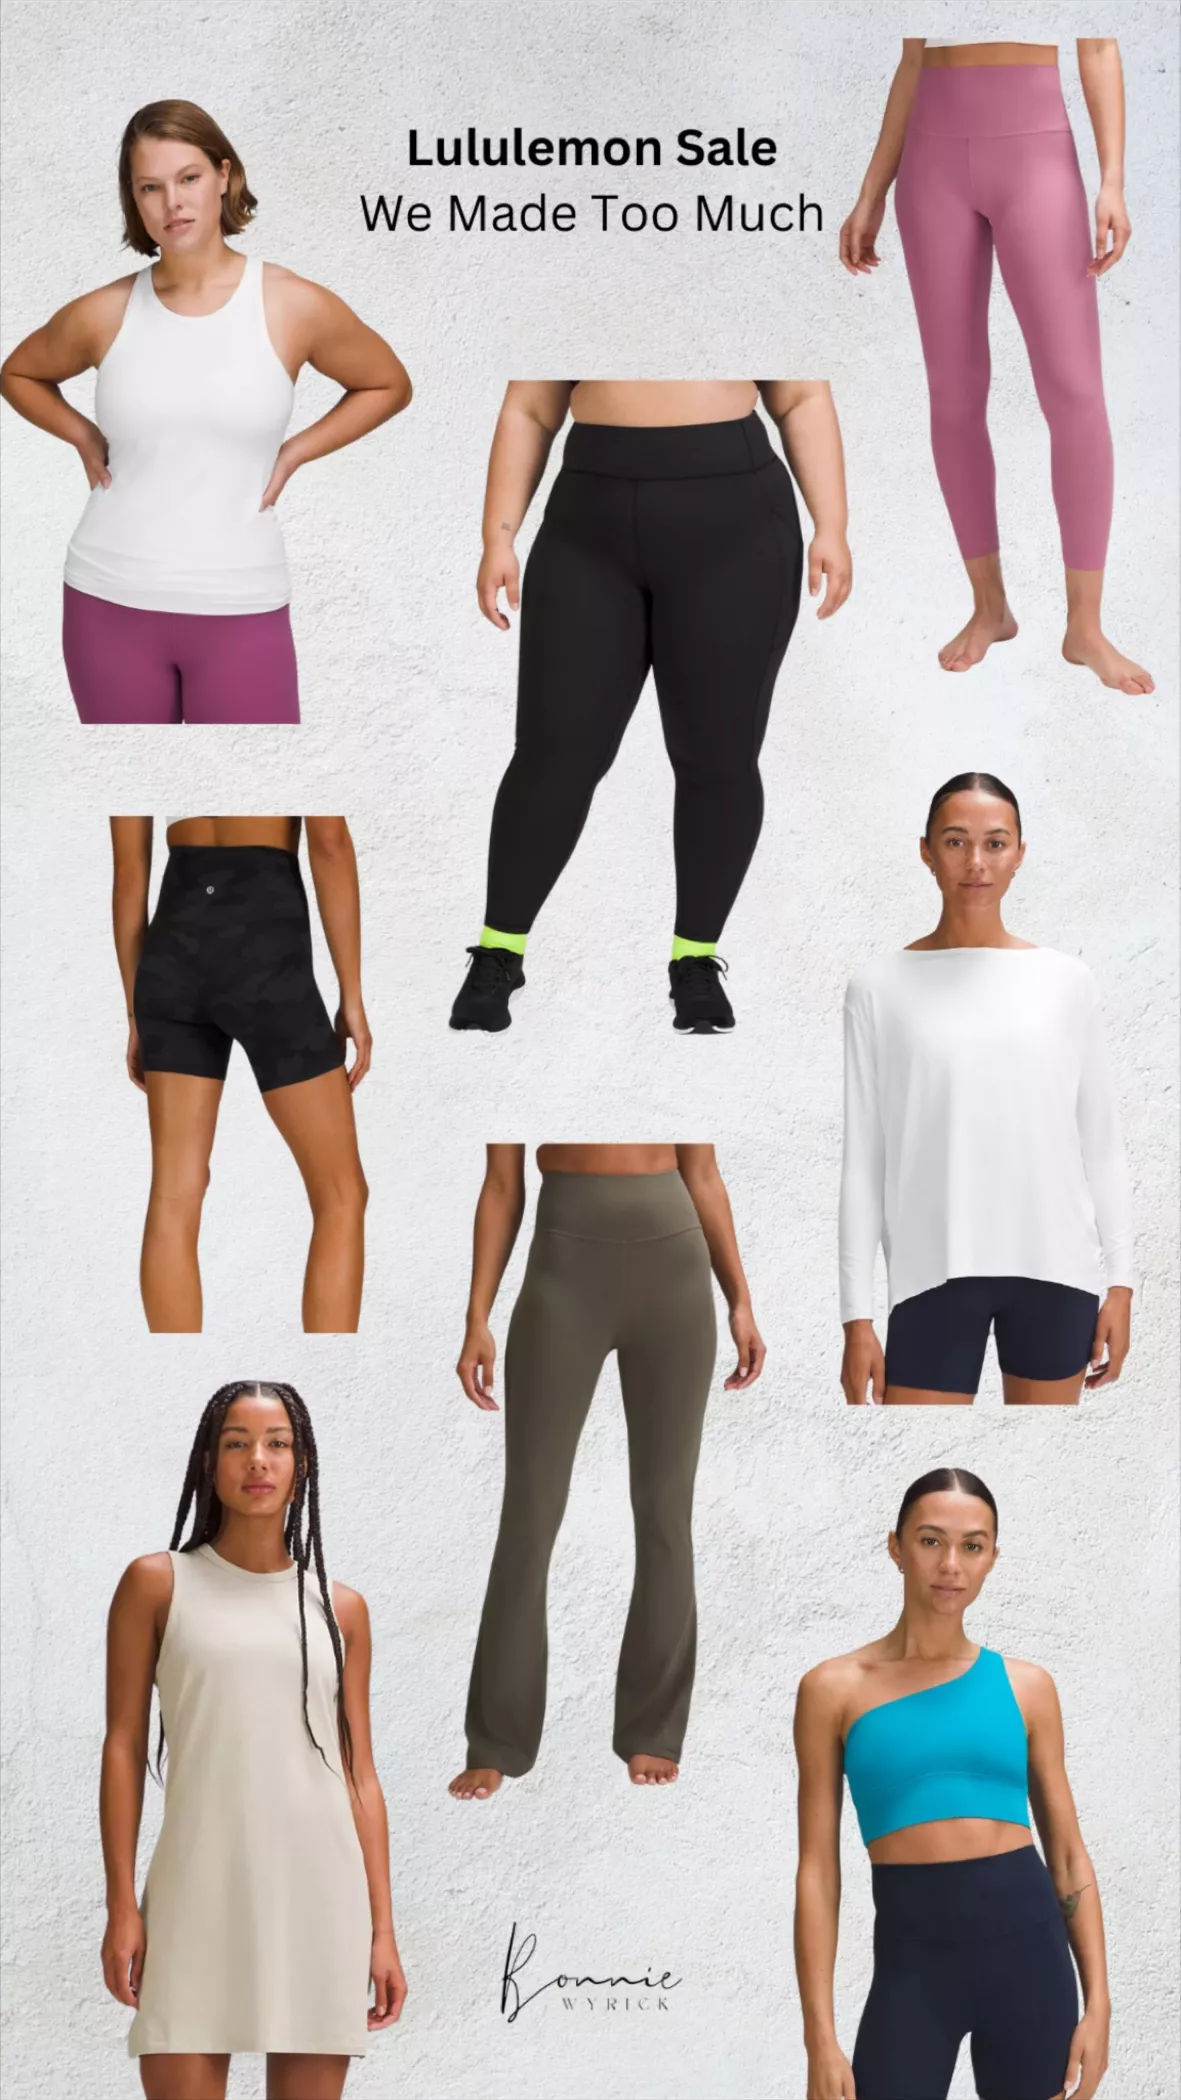 lululemon “we made too much” section purchase